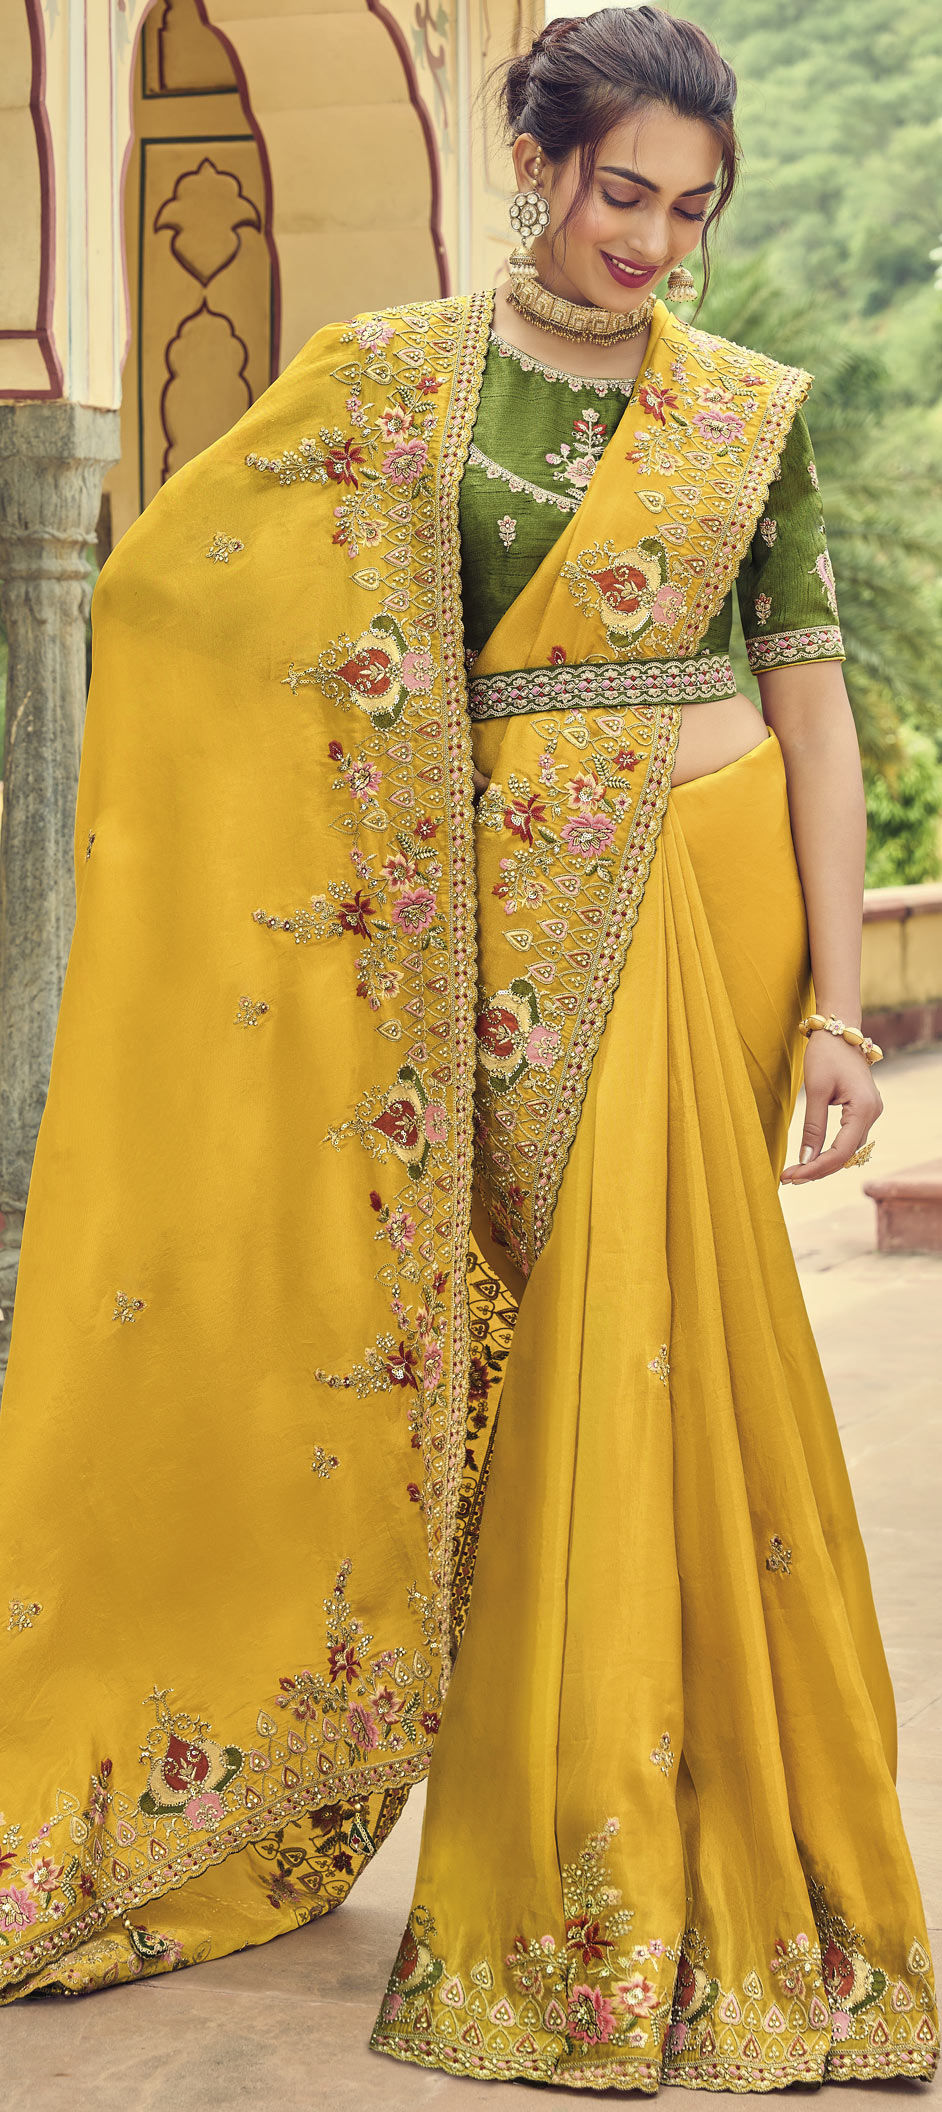 Elevate Your Style: Trending Engagement Saree Ideas for Women in 2023